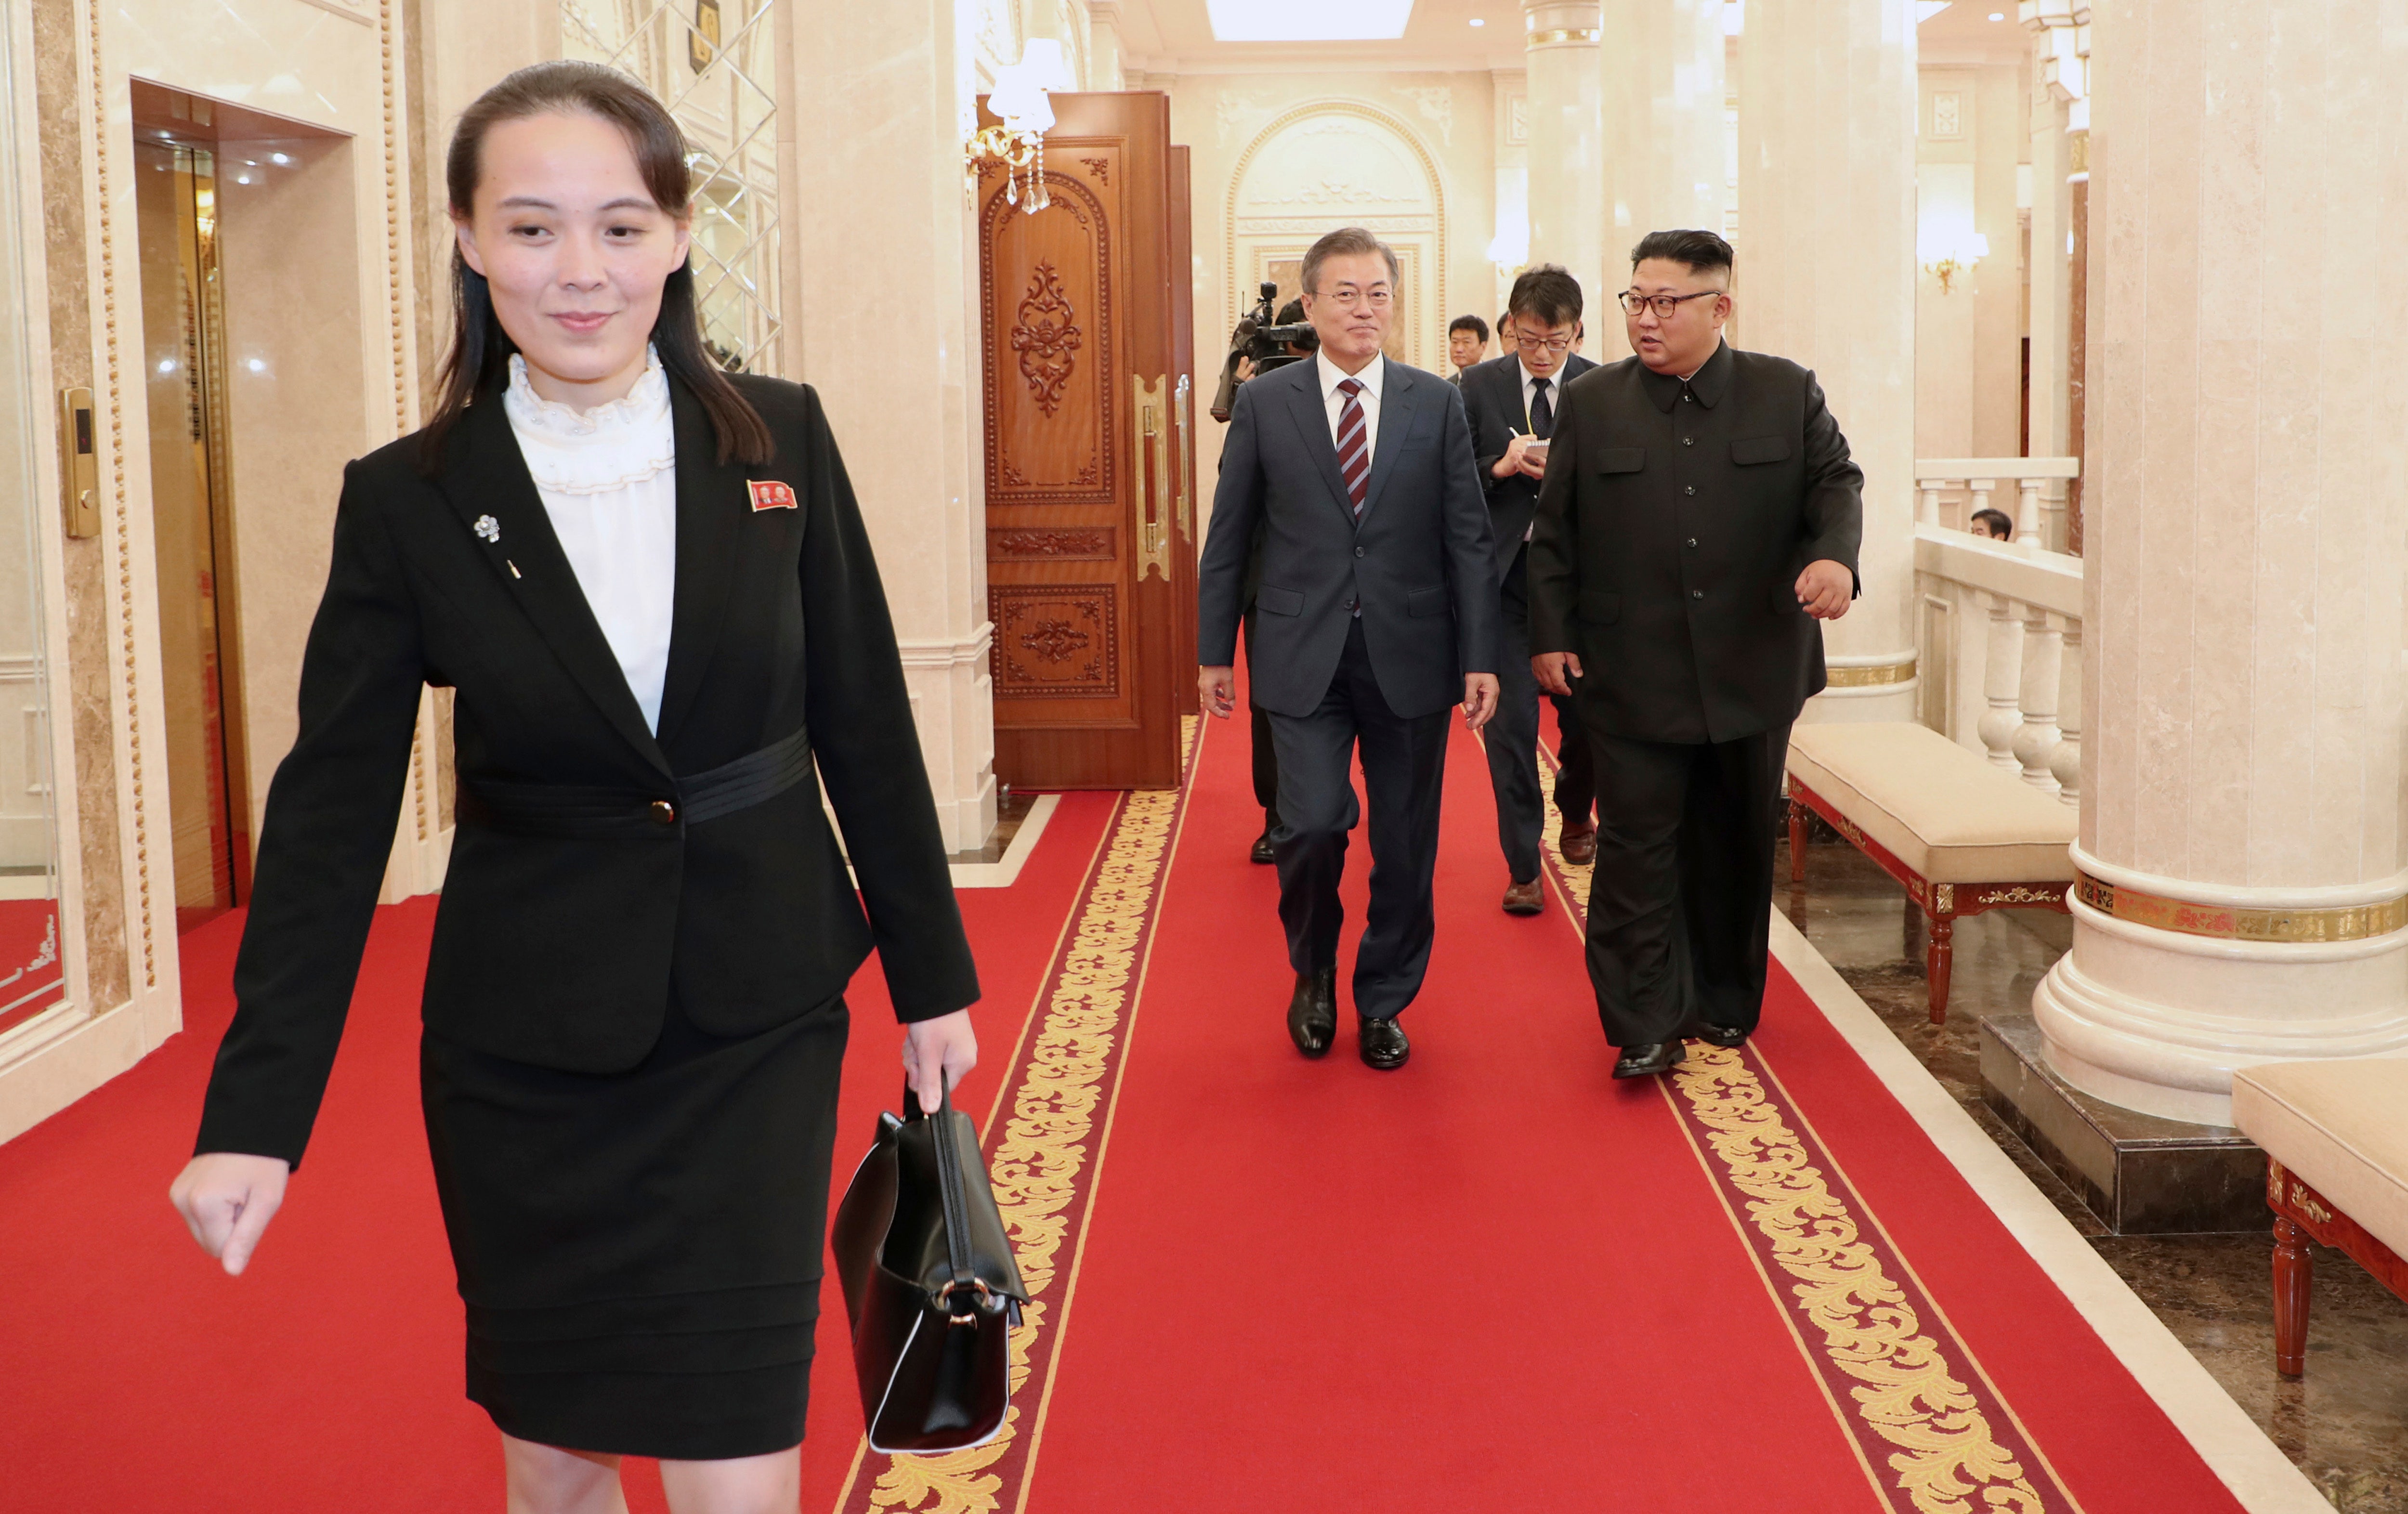 Kim Jong Un's sister tells South Korean president to 'shut his mouth' about nuclear disarmament deal